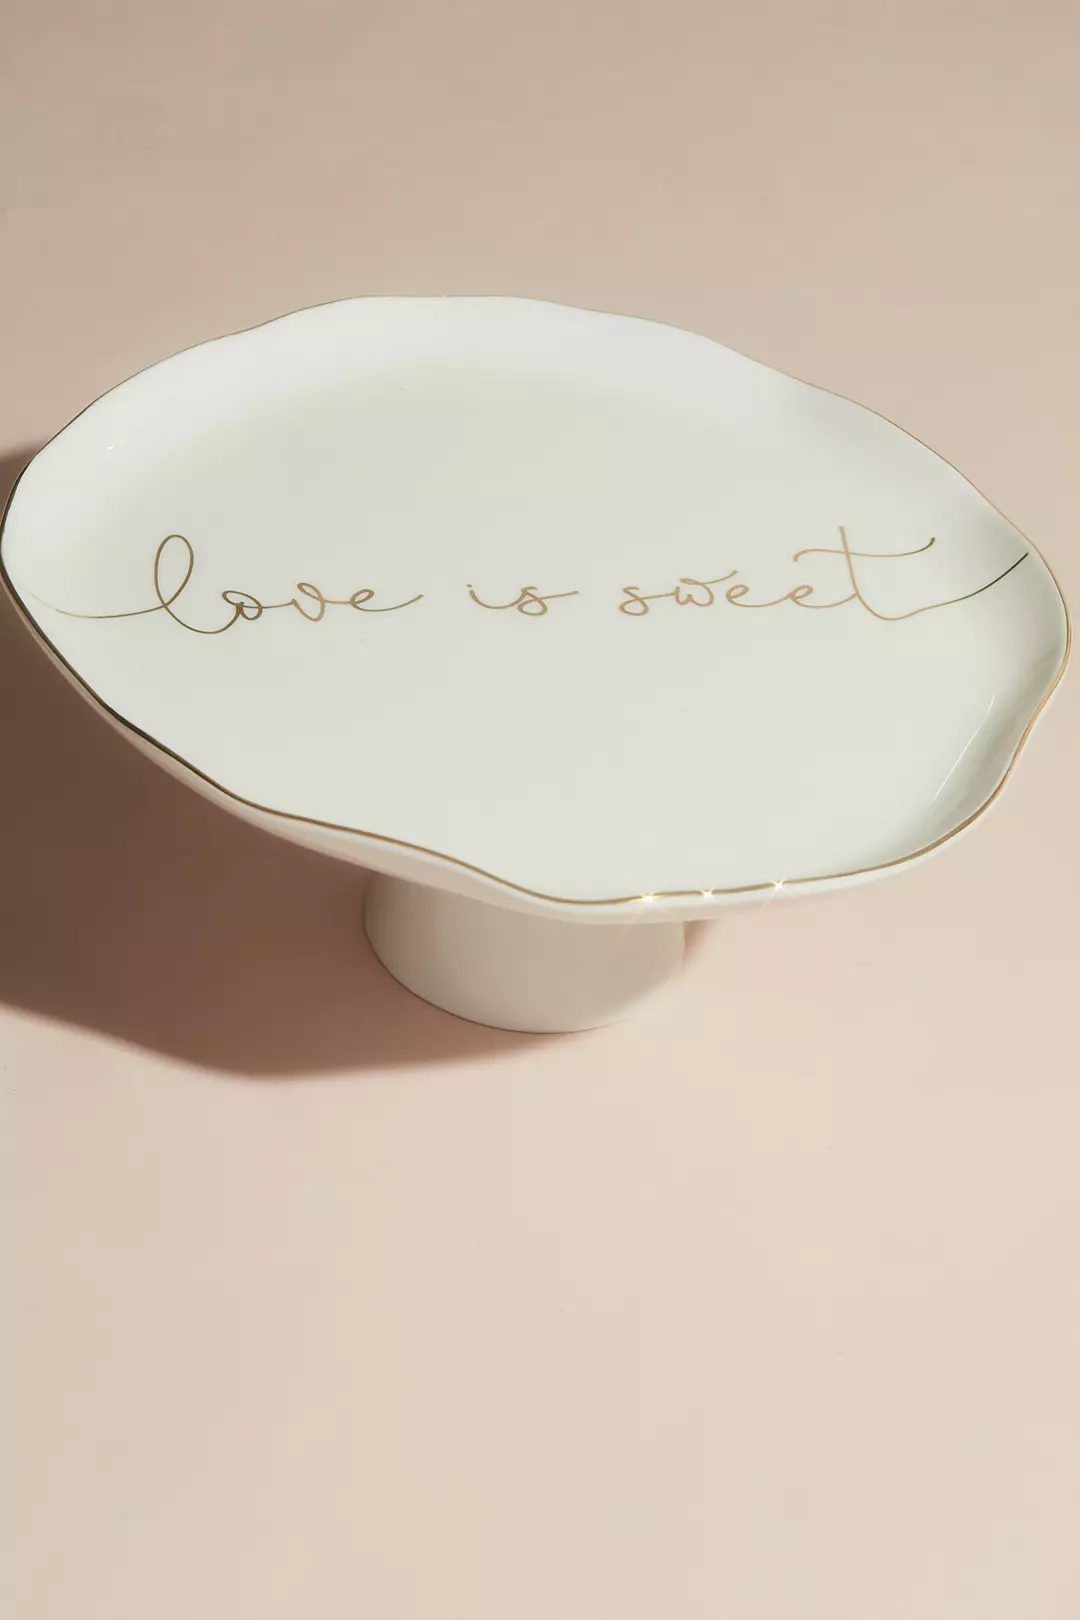 Love is Sweet Ceramic Cake Stand Image